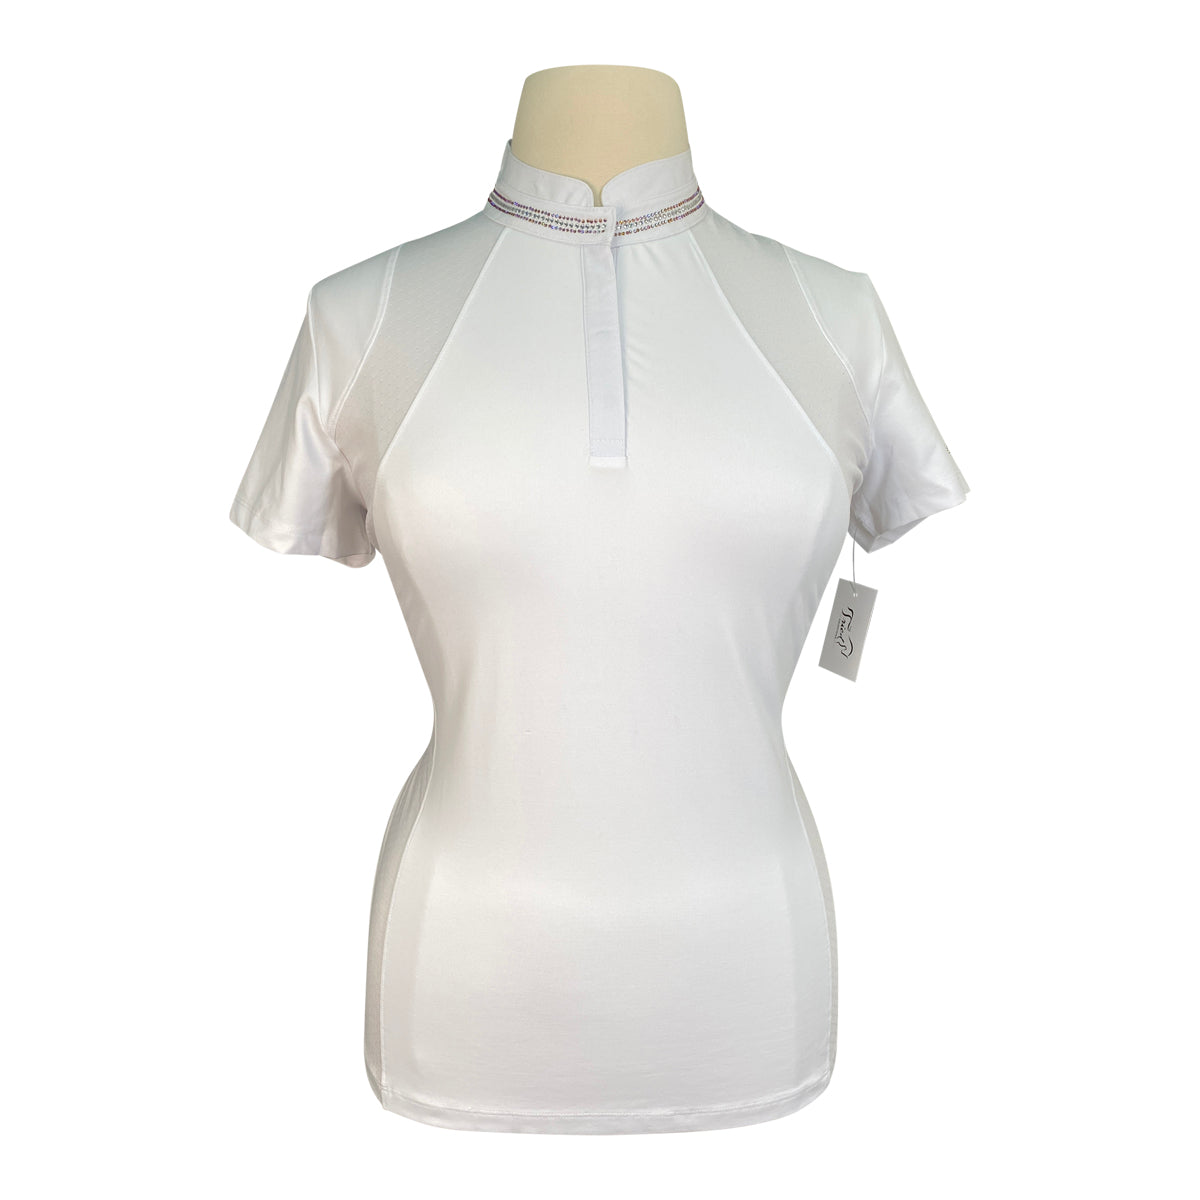 Pikeur 'Phiola' Competition Shirt in White